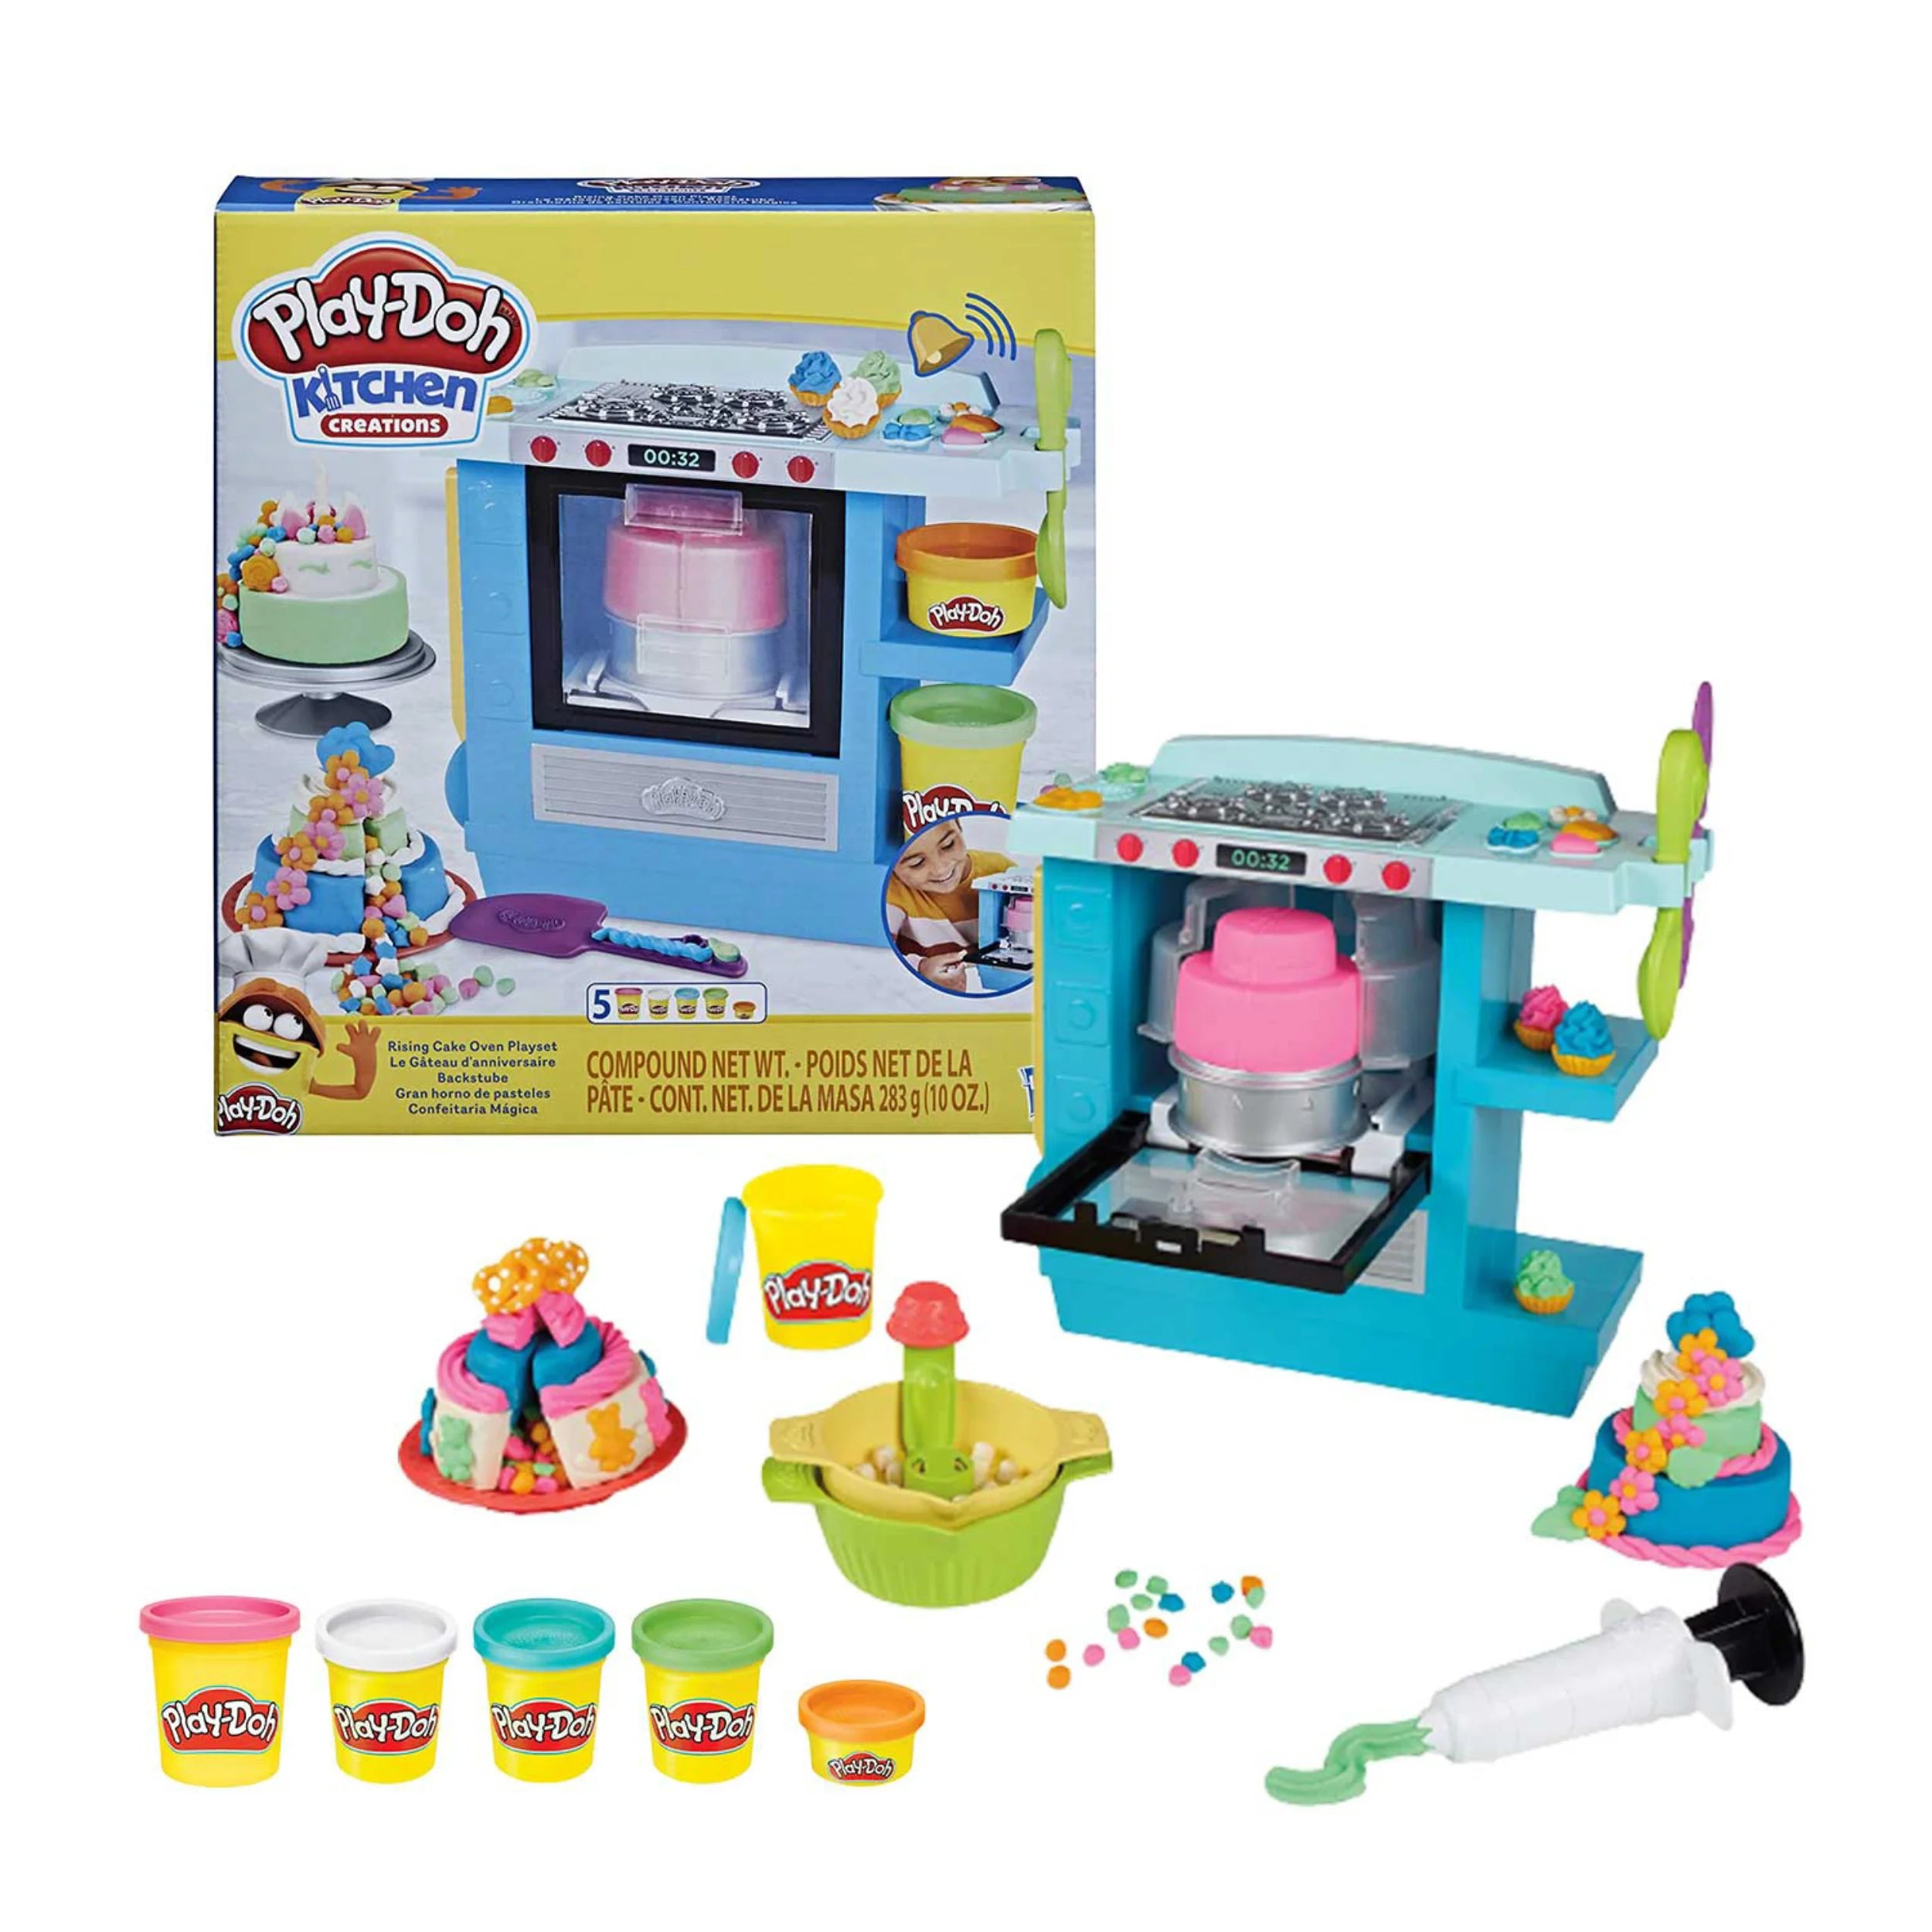 https://www.appytoys.it/cdn/shop/files/APPYTOYS-play-doh-kitchen-creations-rising-cake-oven-bakery-playset-for-kids-3-years-and-up-with-5-modeling-compound-colors-non-toxic-mod-hsbf13215l0-2500X2500.webp?v=1689342380